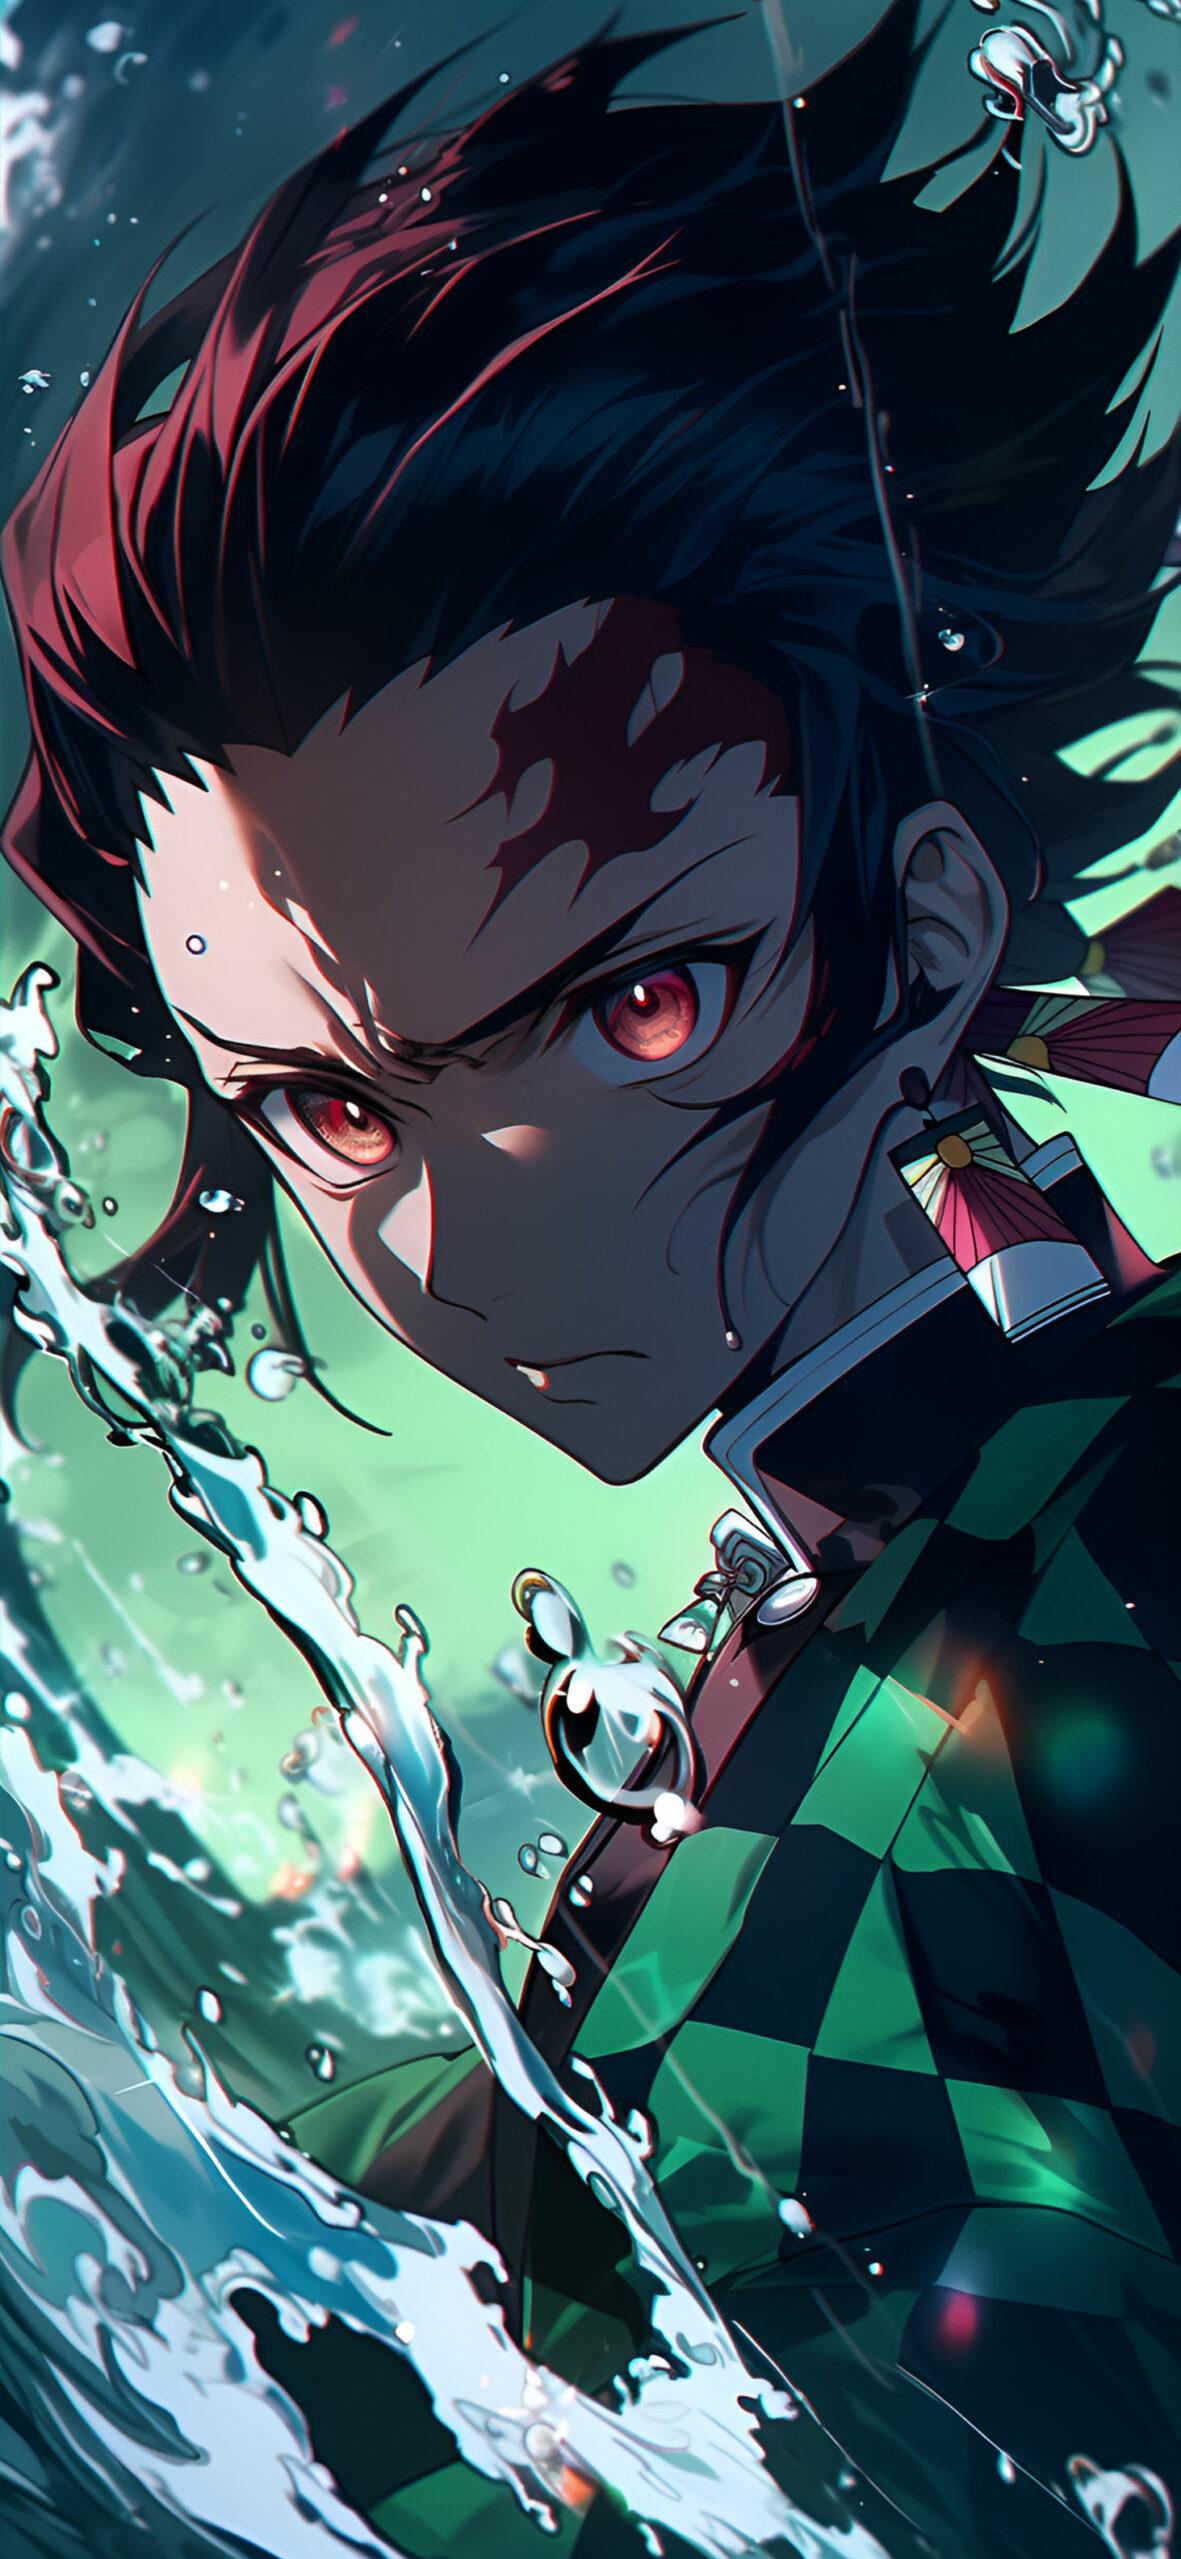 Tanjiro Behind the Wave Art Wallpapers Demon Slayer Wallpapers